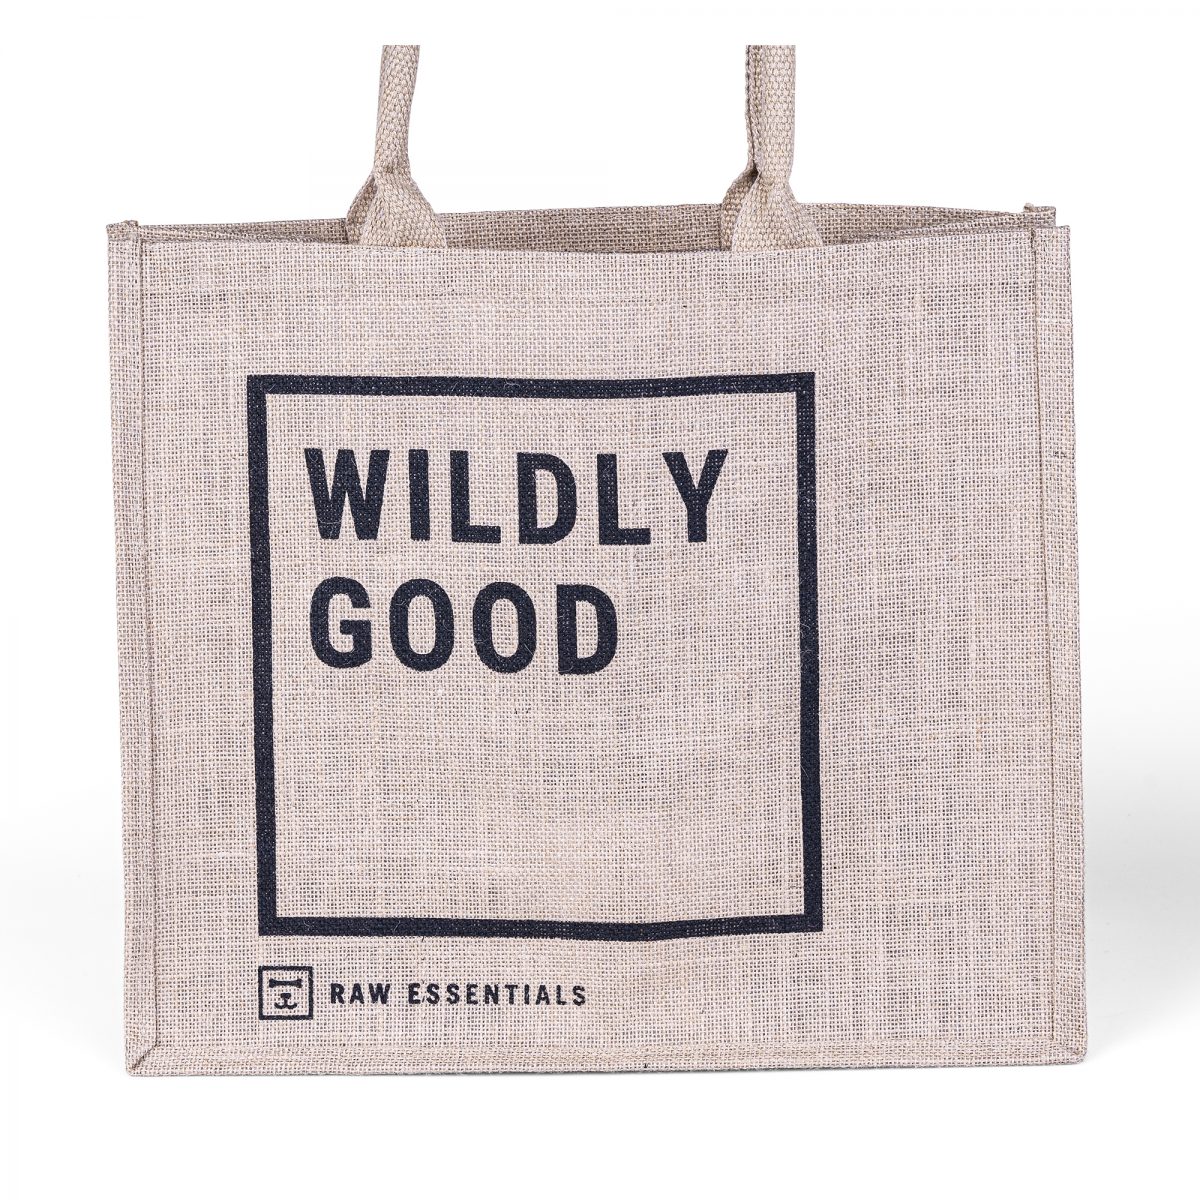 Jute Bag With Black Square Outline With "Wildly Good" Written On Front